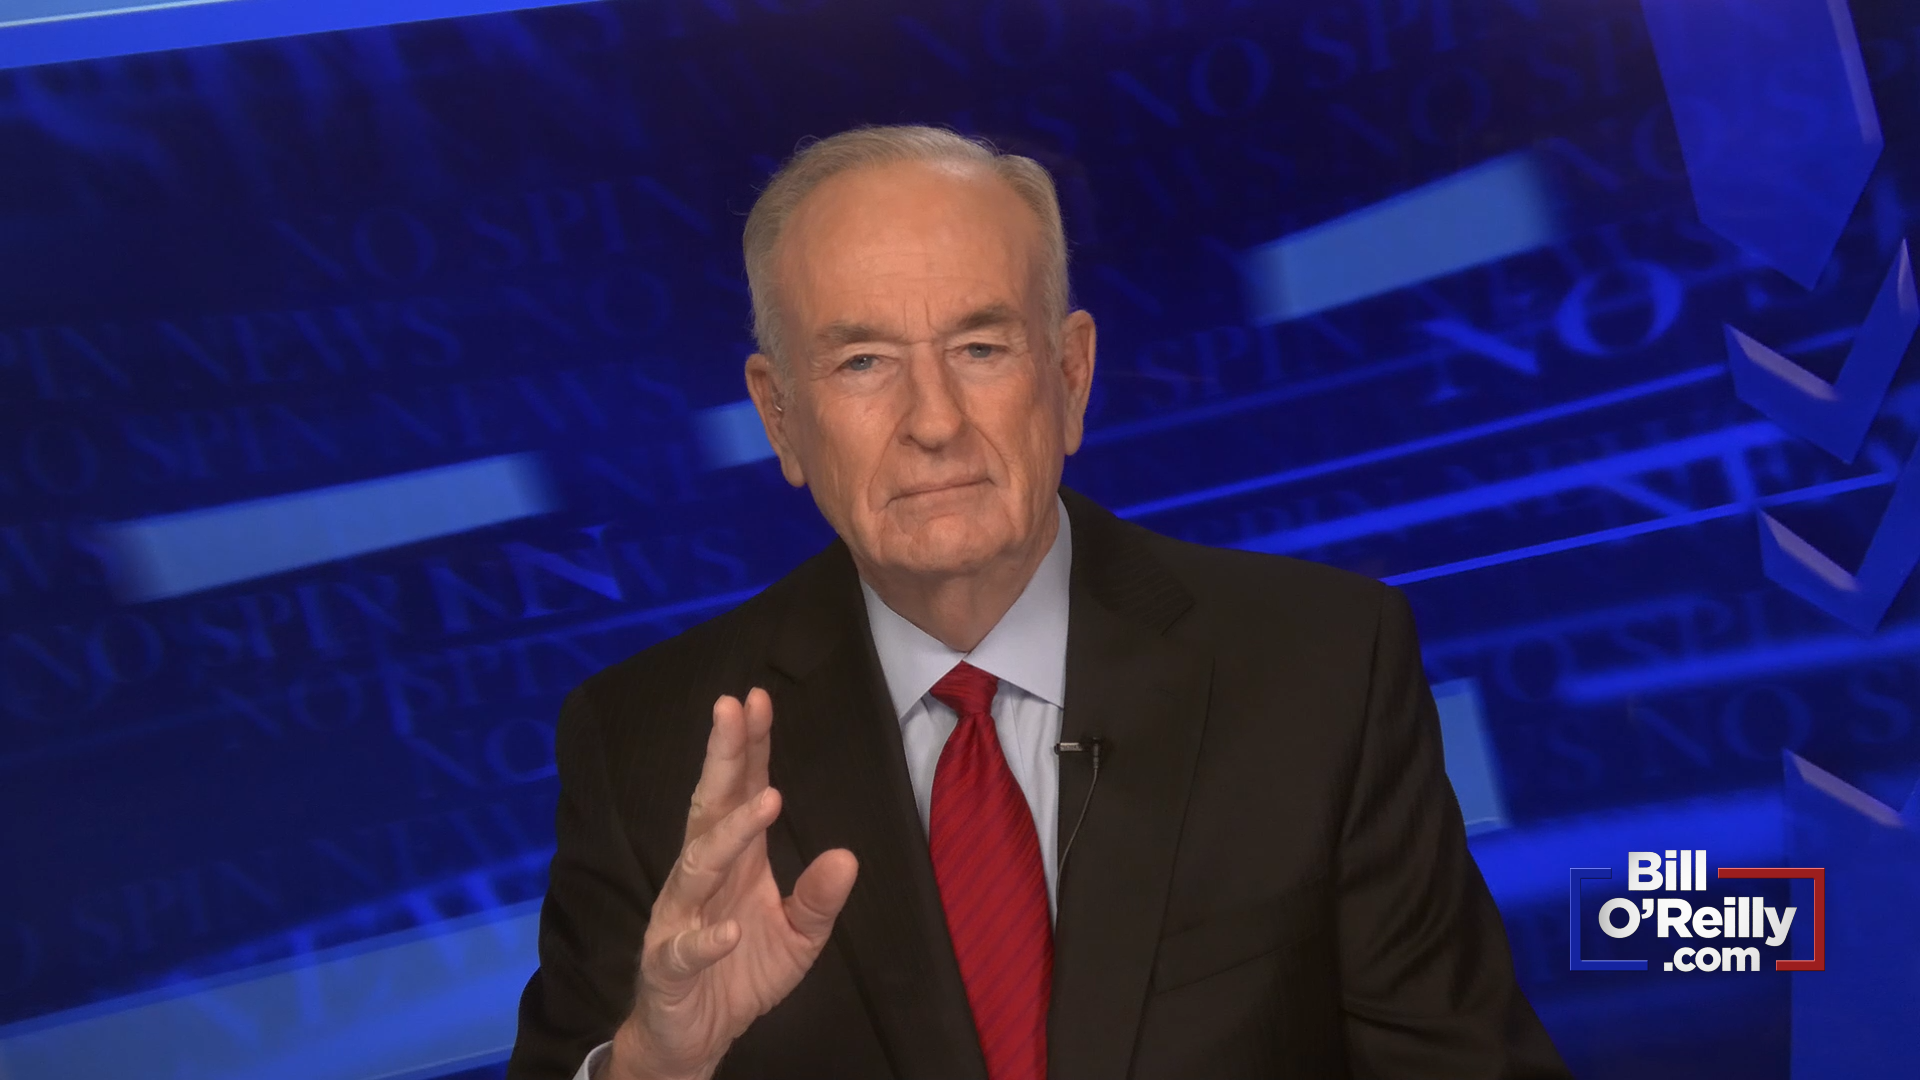 O'Reilly on the Latest Terror Attack: 'The World Needs to See a Response!'